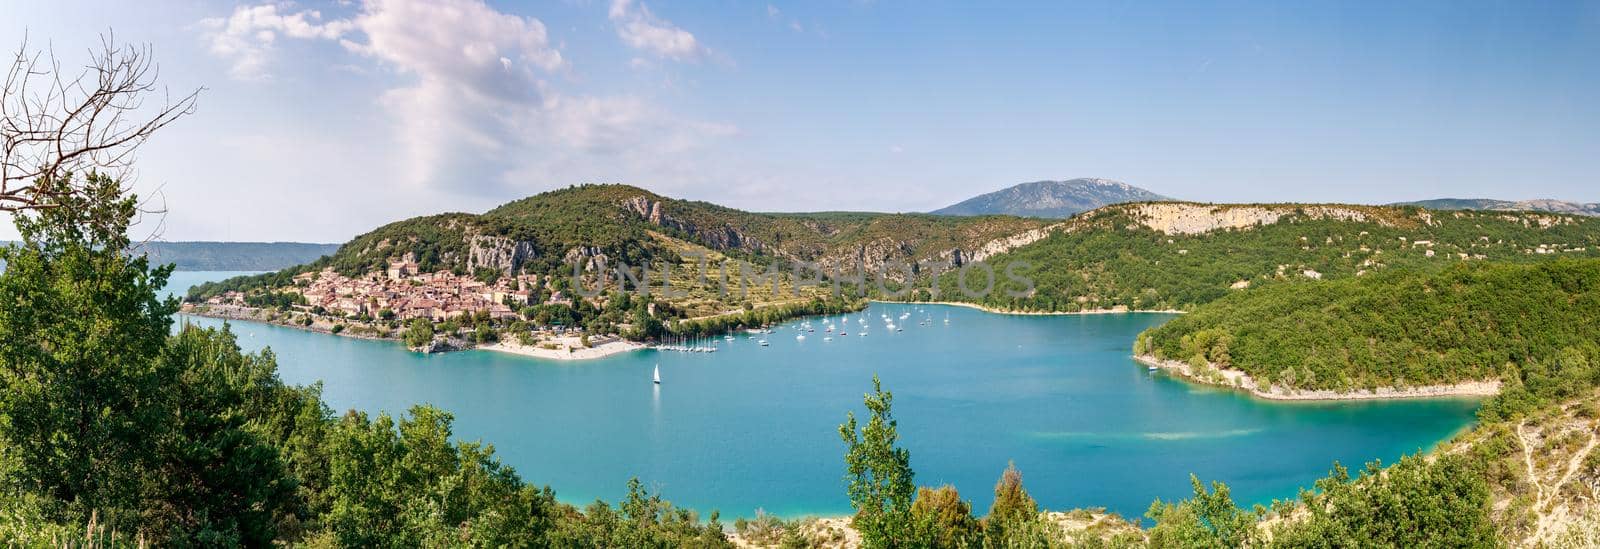 The city on the bank of the artificial lake in France, Provence, lake Saint Cross, gorge Verdone, azure water of the lake and slopes of mountains on a background, small boats, vacations place by vladimirdrozdin